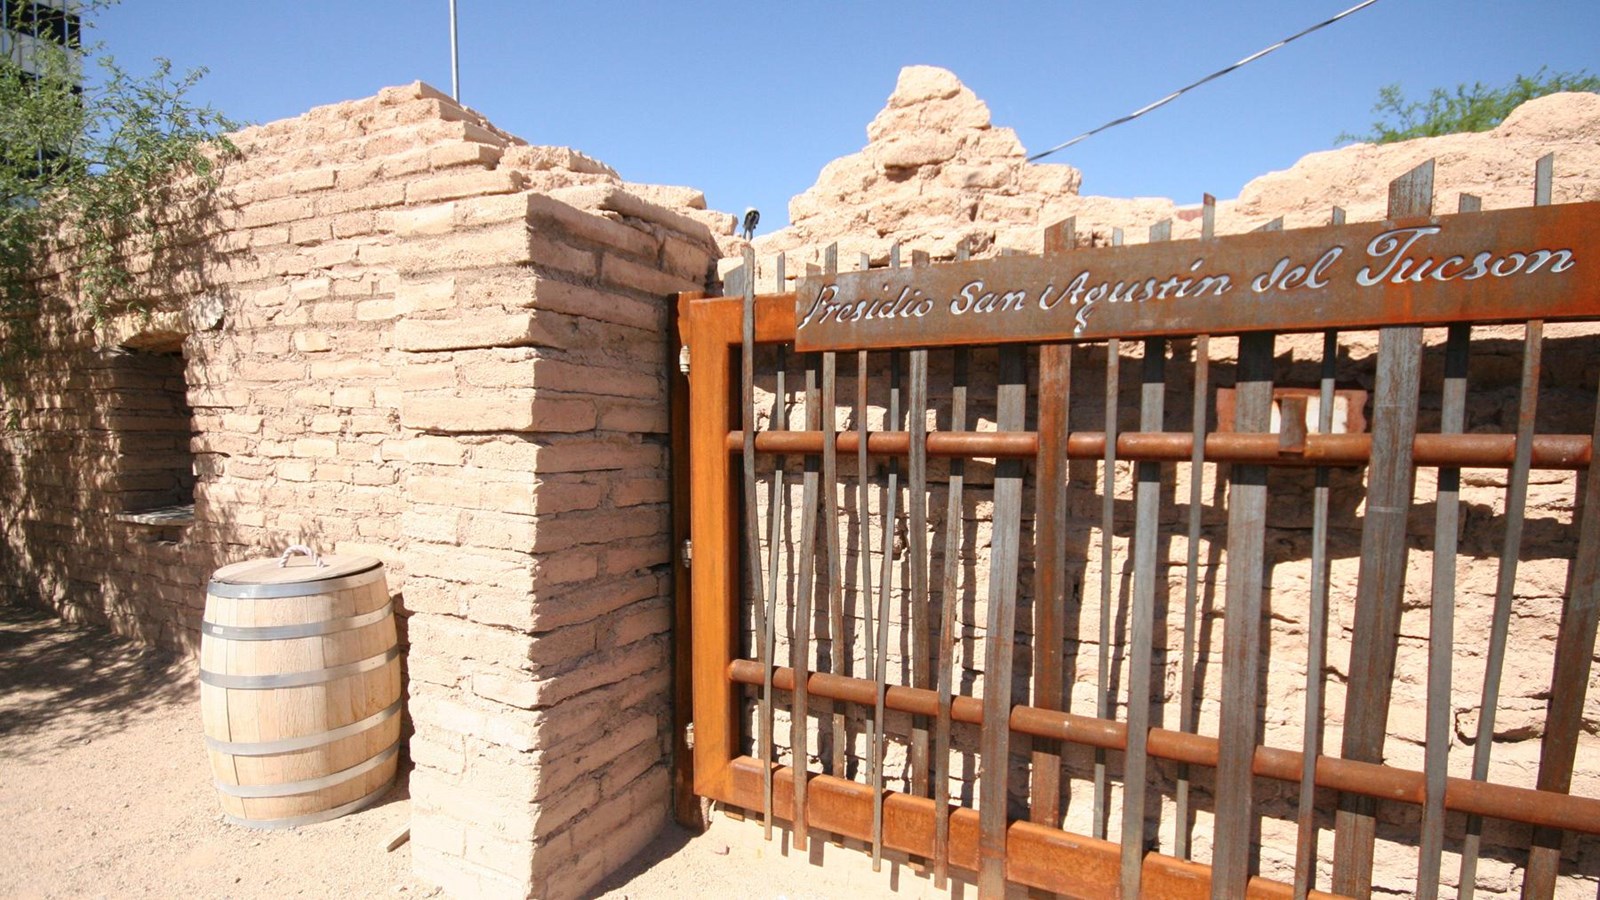 An adobe wall and rusty entrance gate with the lettering, Presidio San Agustin del Tucson